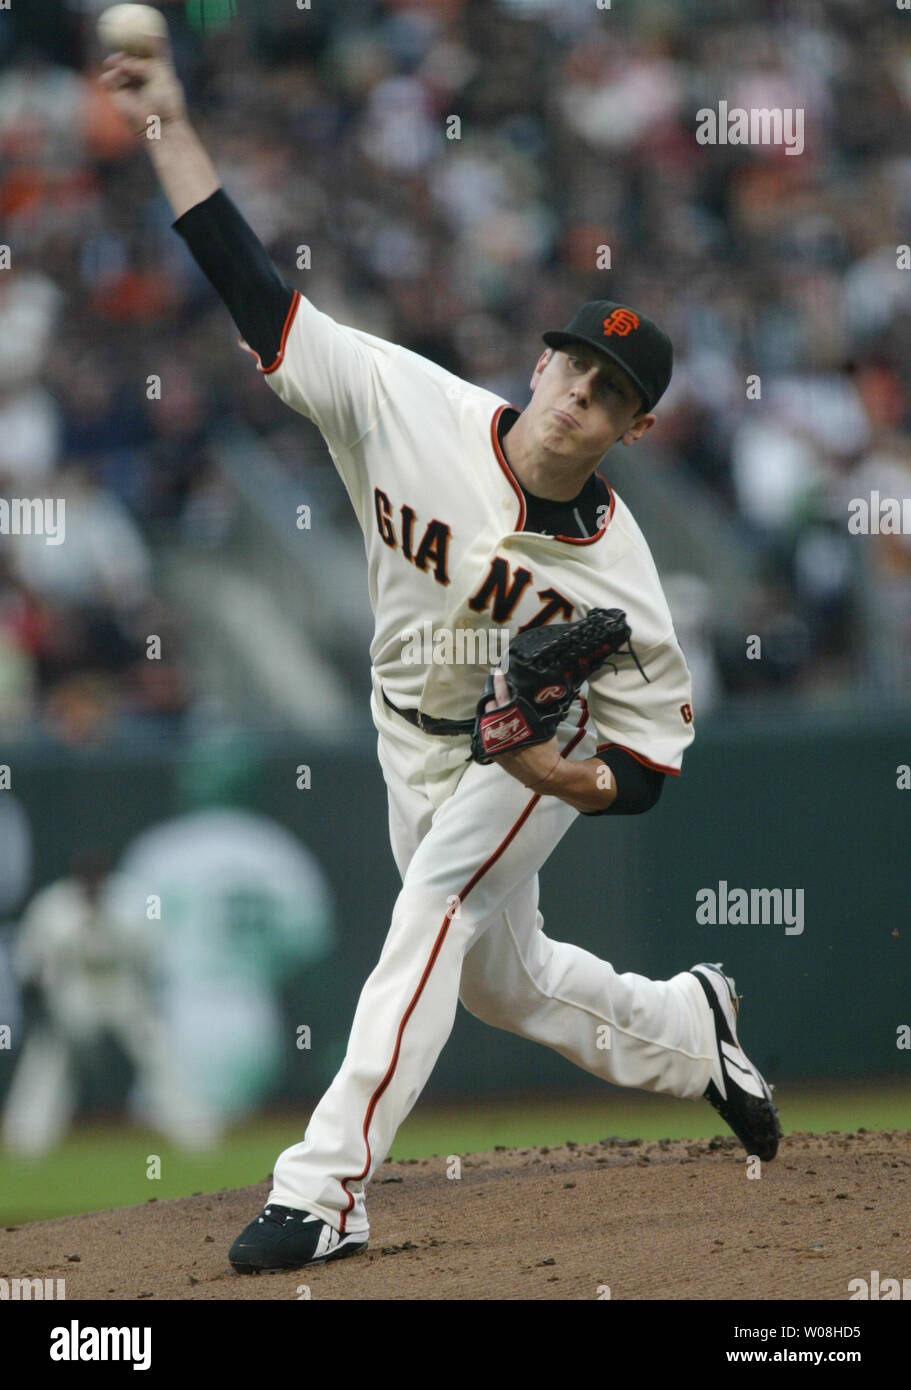 San Francisco Giants pitcher Tim Lincecum throws against the Washington Nationals in the first inning at AT&T Park in San Francisco on August 6, 2007.   (UPI Photo/Bruce Gordon) Stock Photo